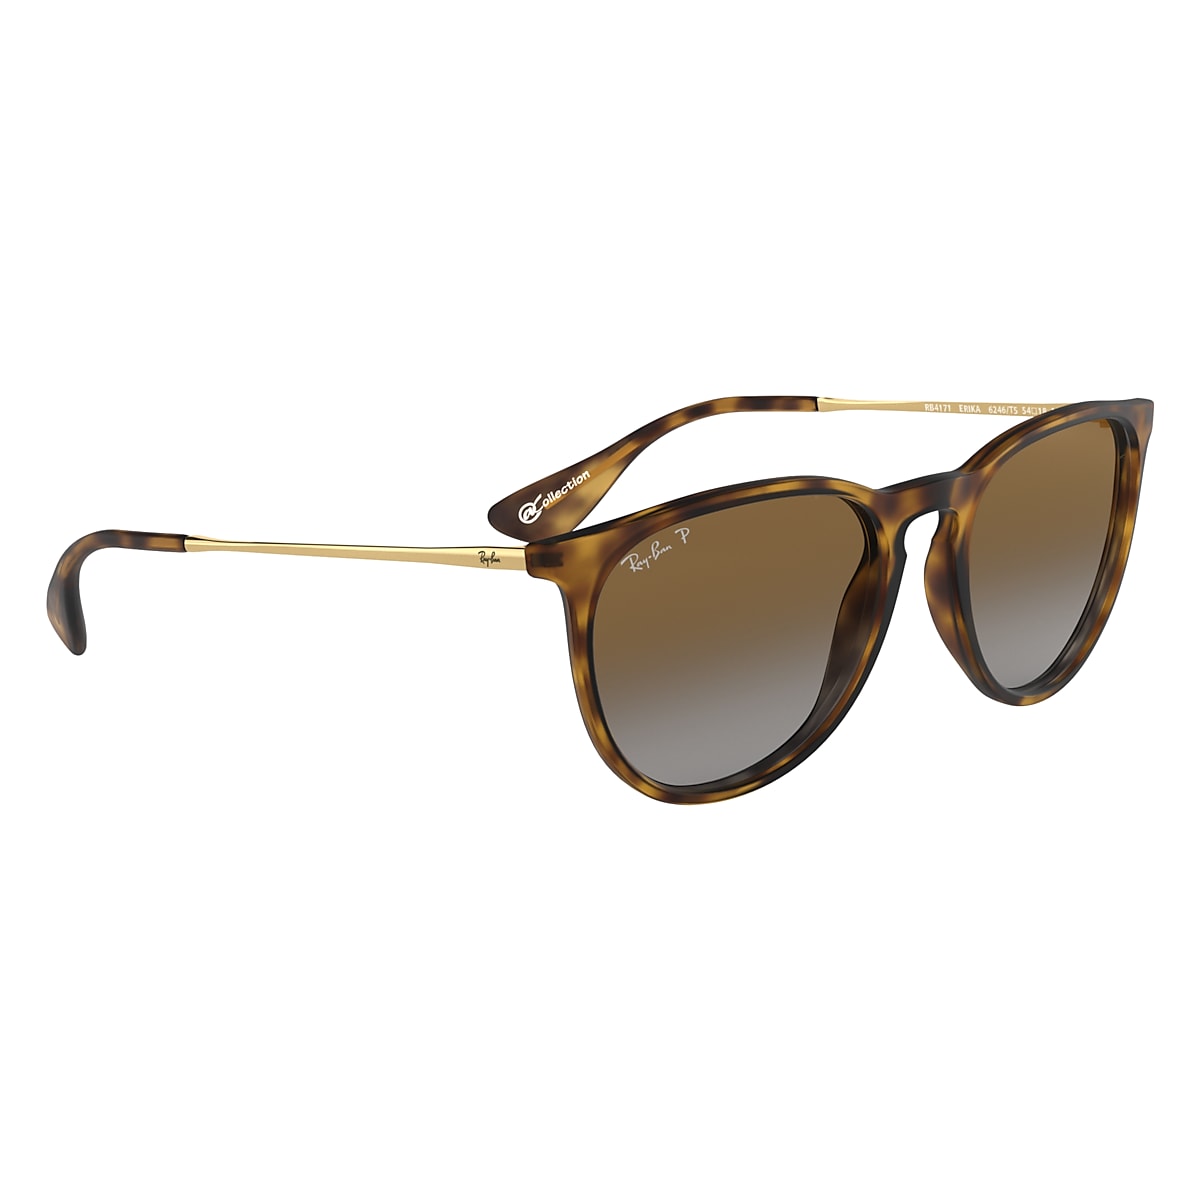 ERIKA @COLLECTION Sunglasses in Havana and Brown - RB4171 | Ray